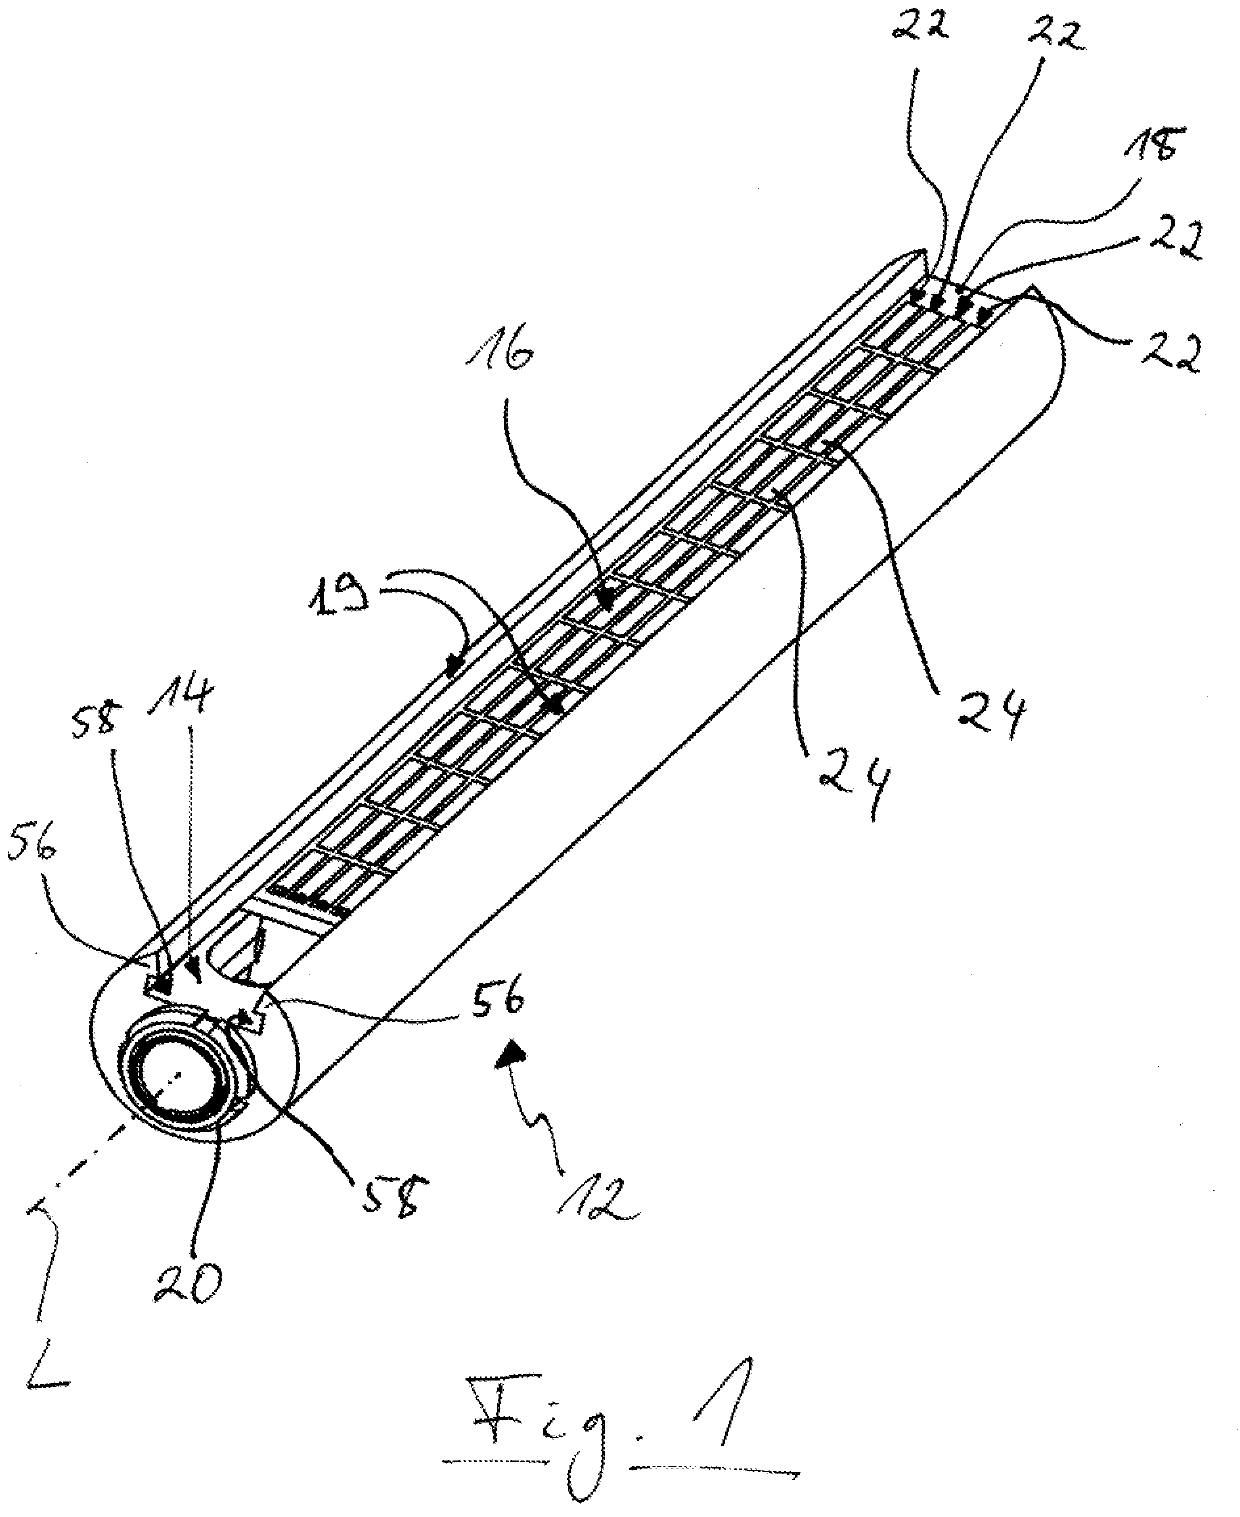 Support rod for an accessory component of a motion picture camera